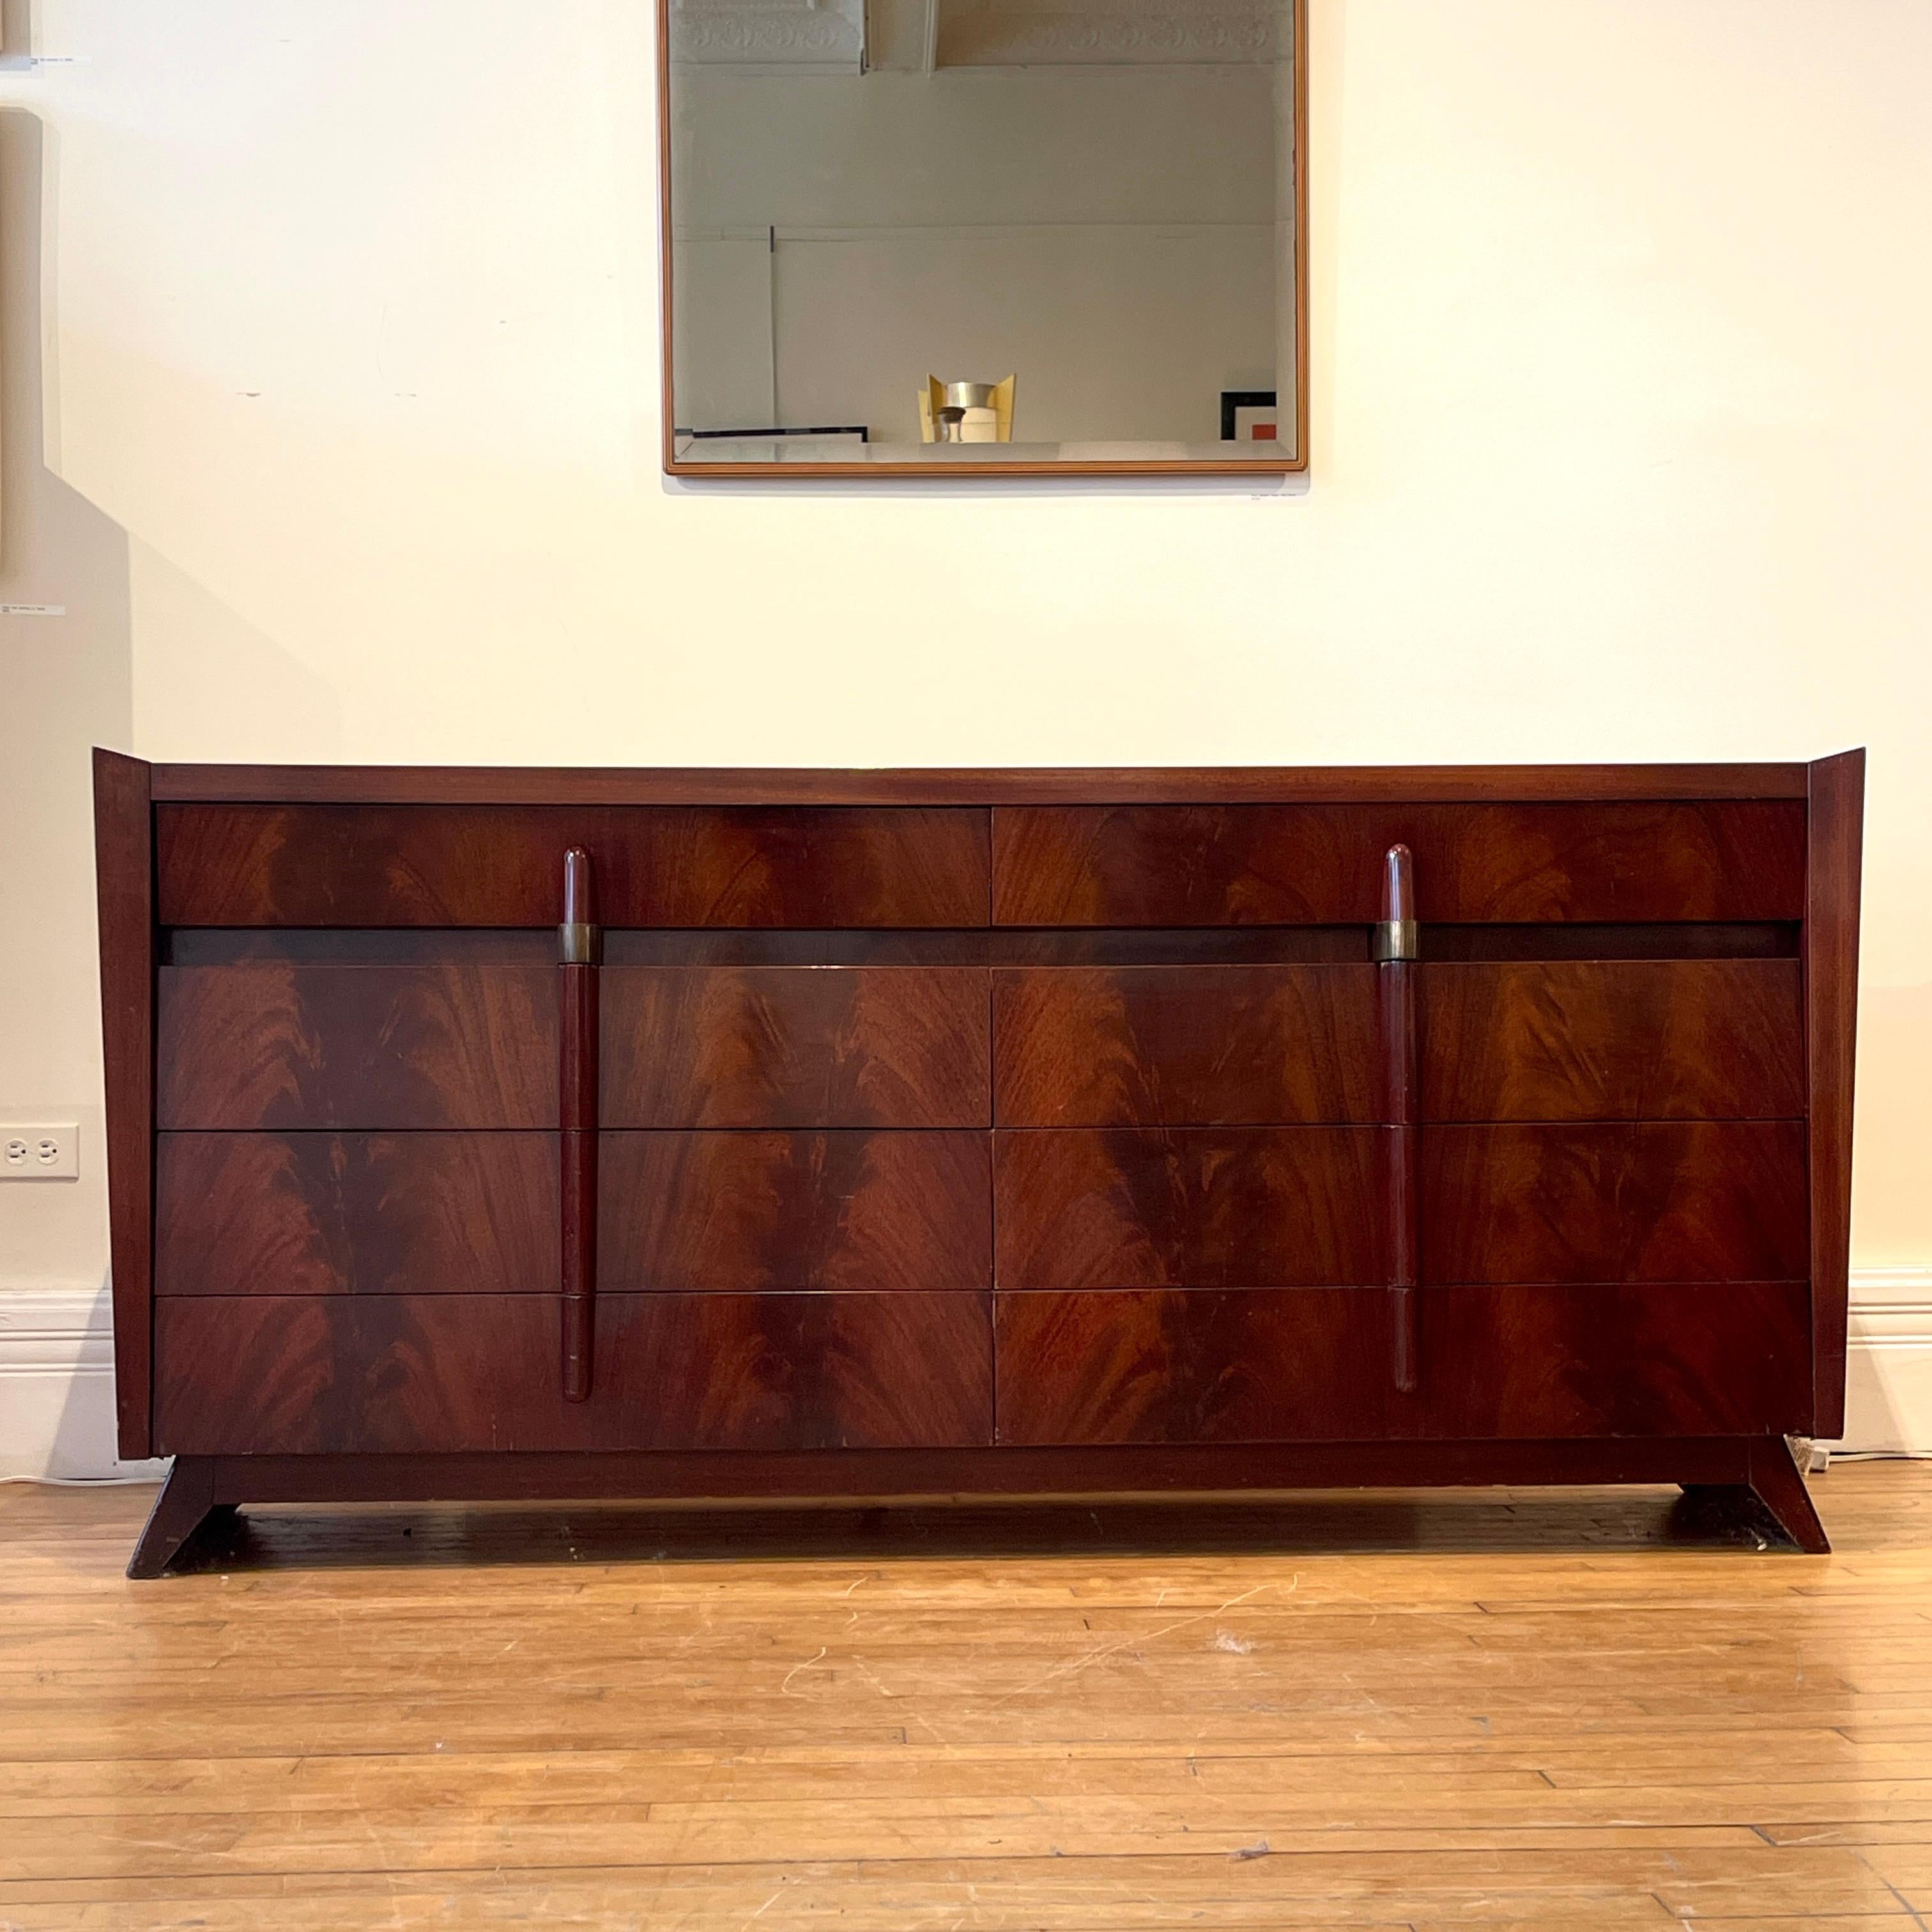 Stunning and elegant American Art Deco high gloss mahogany and brass 8 drawer dresser or credenza.